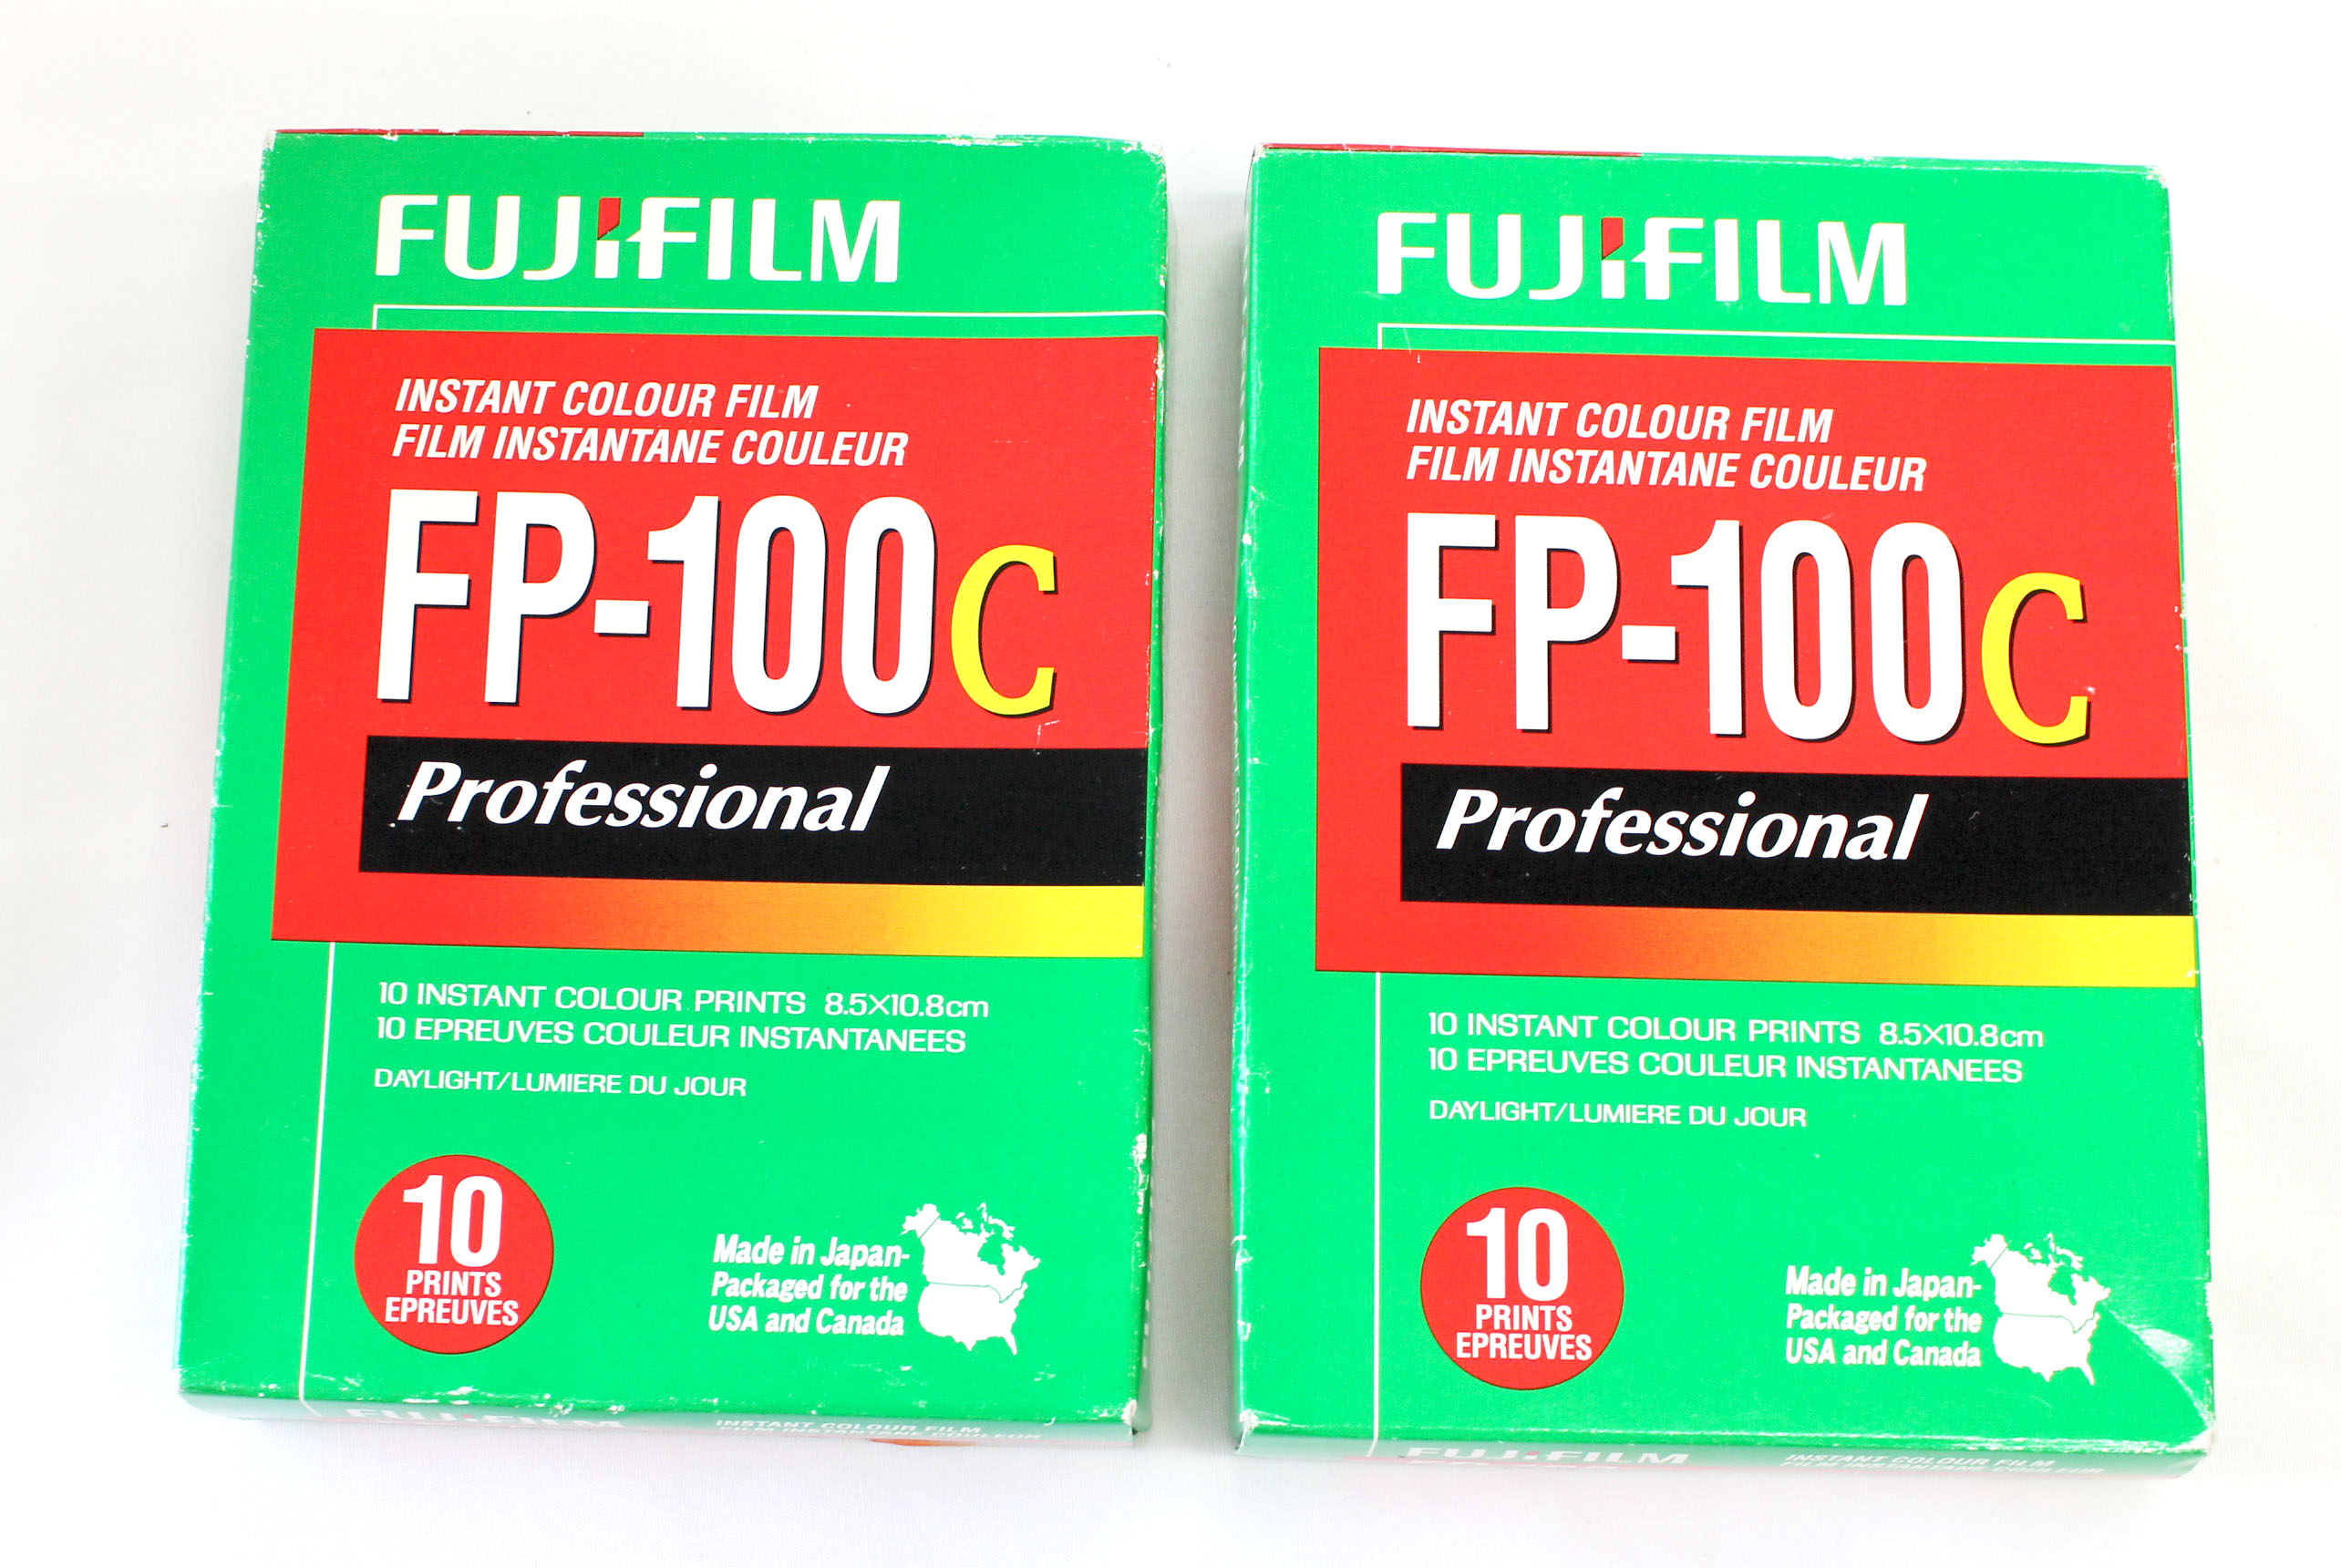 Japan Used Camera Shop | [New] Fujifilm FP-100C Professional Instant Color Film Set of 2 (Exp 2009) from Japan